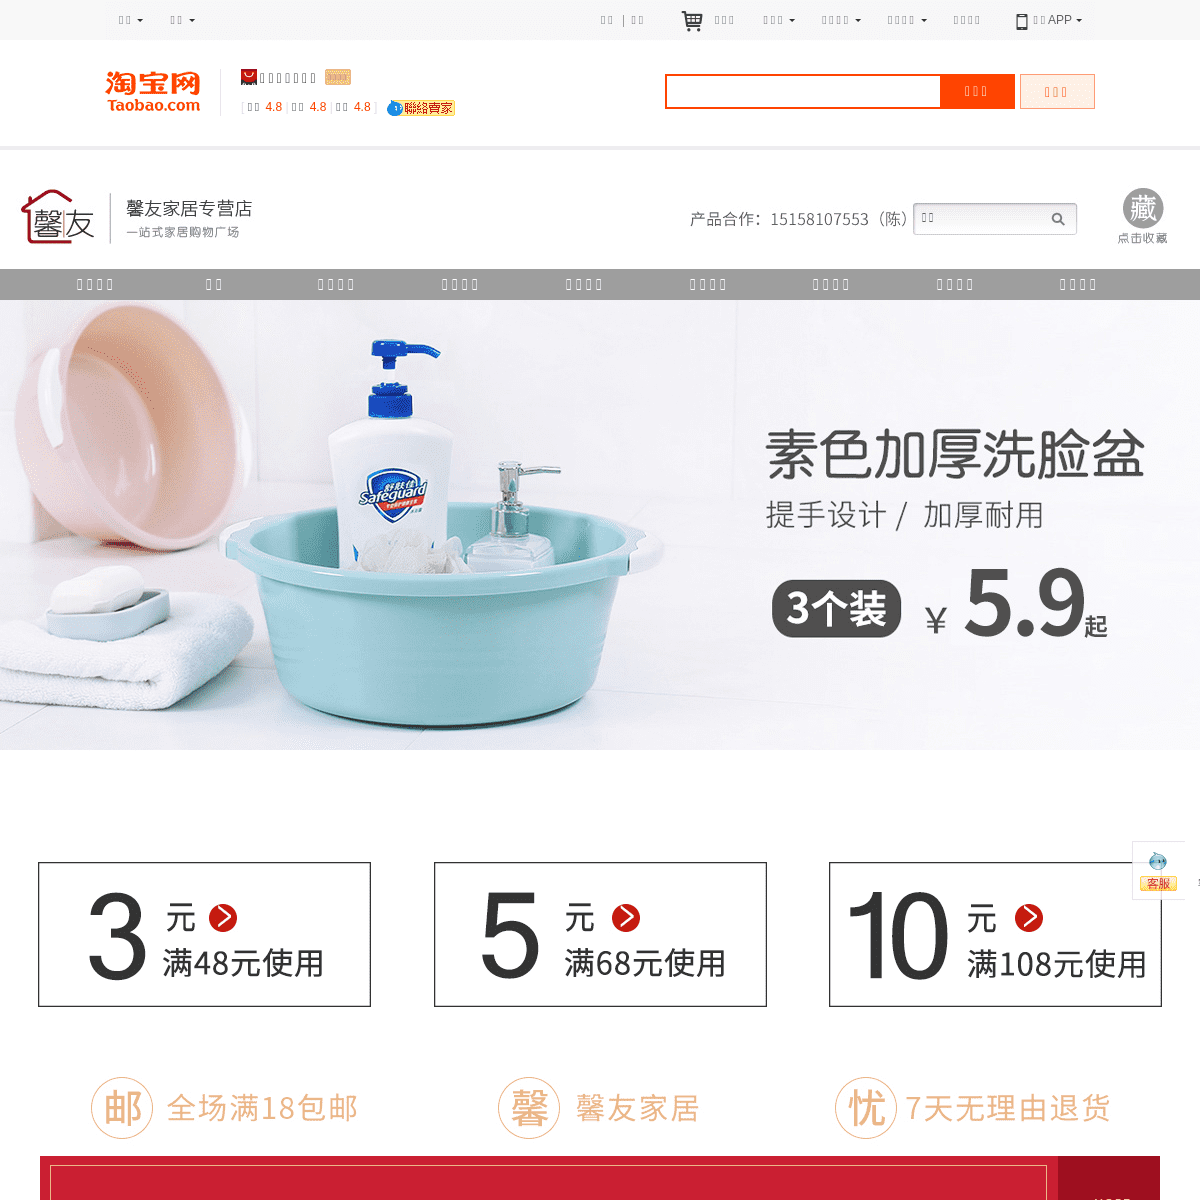 A complete backup of xinyoujj.tmall.com